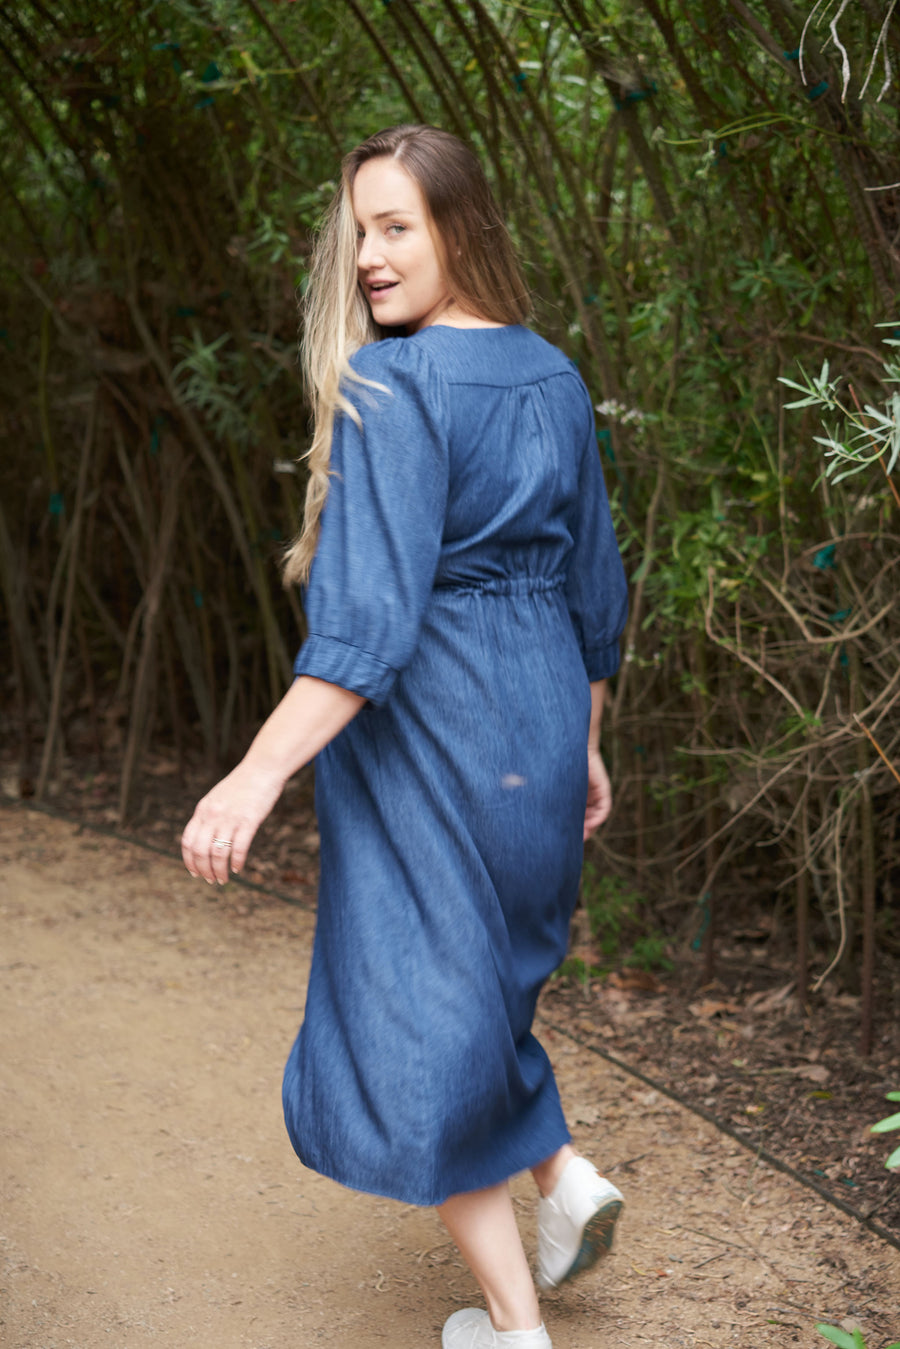 Discover comfortable and stylish clothing options featuring the versatile ANDI adjustable wrap dress.